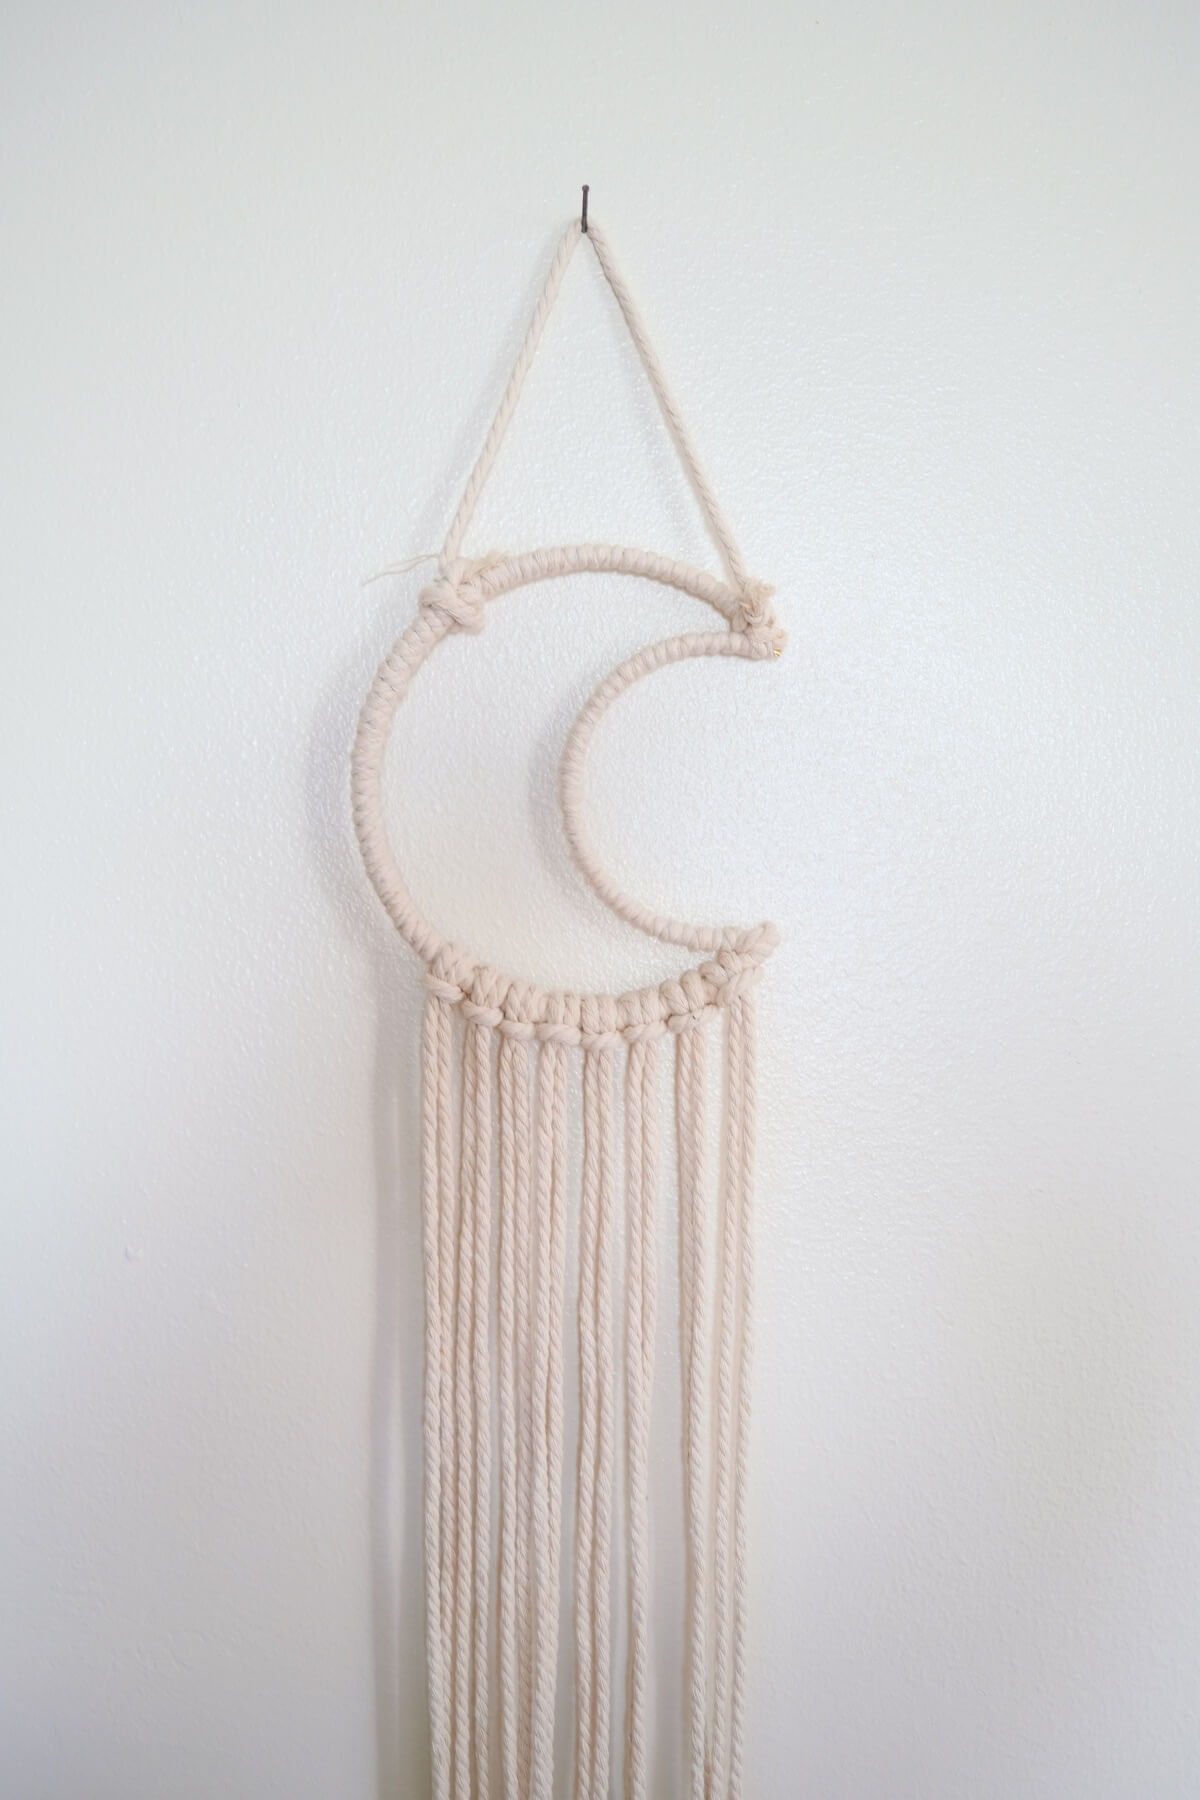 hang your macrame wall hanging on the wall